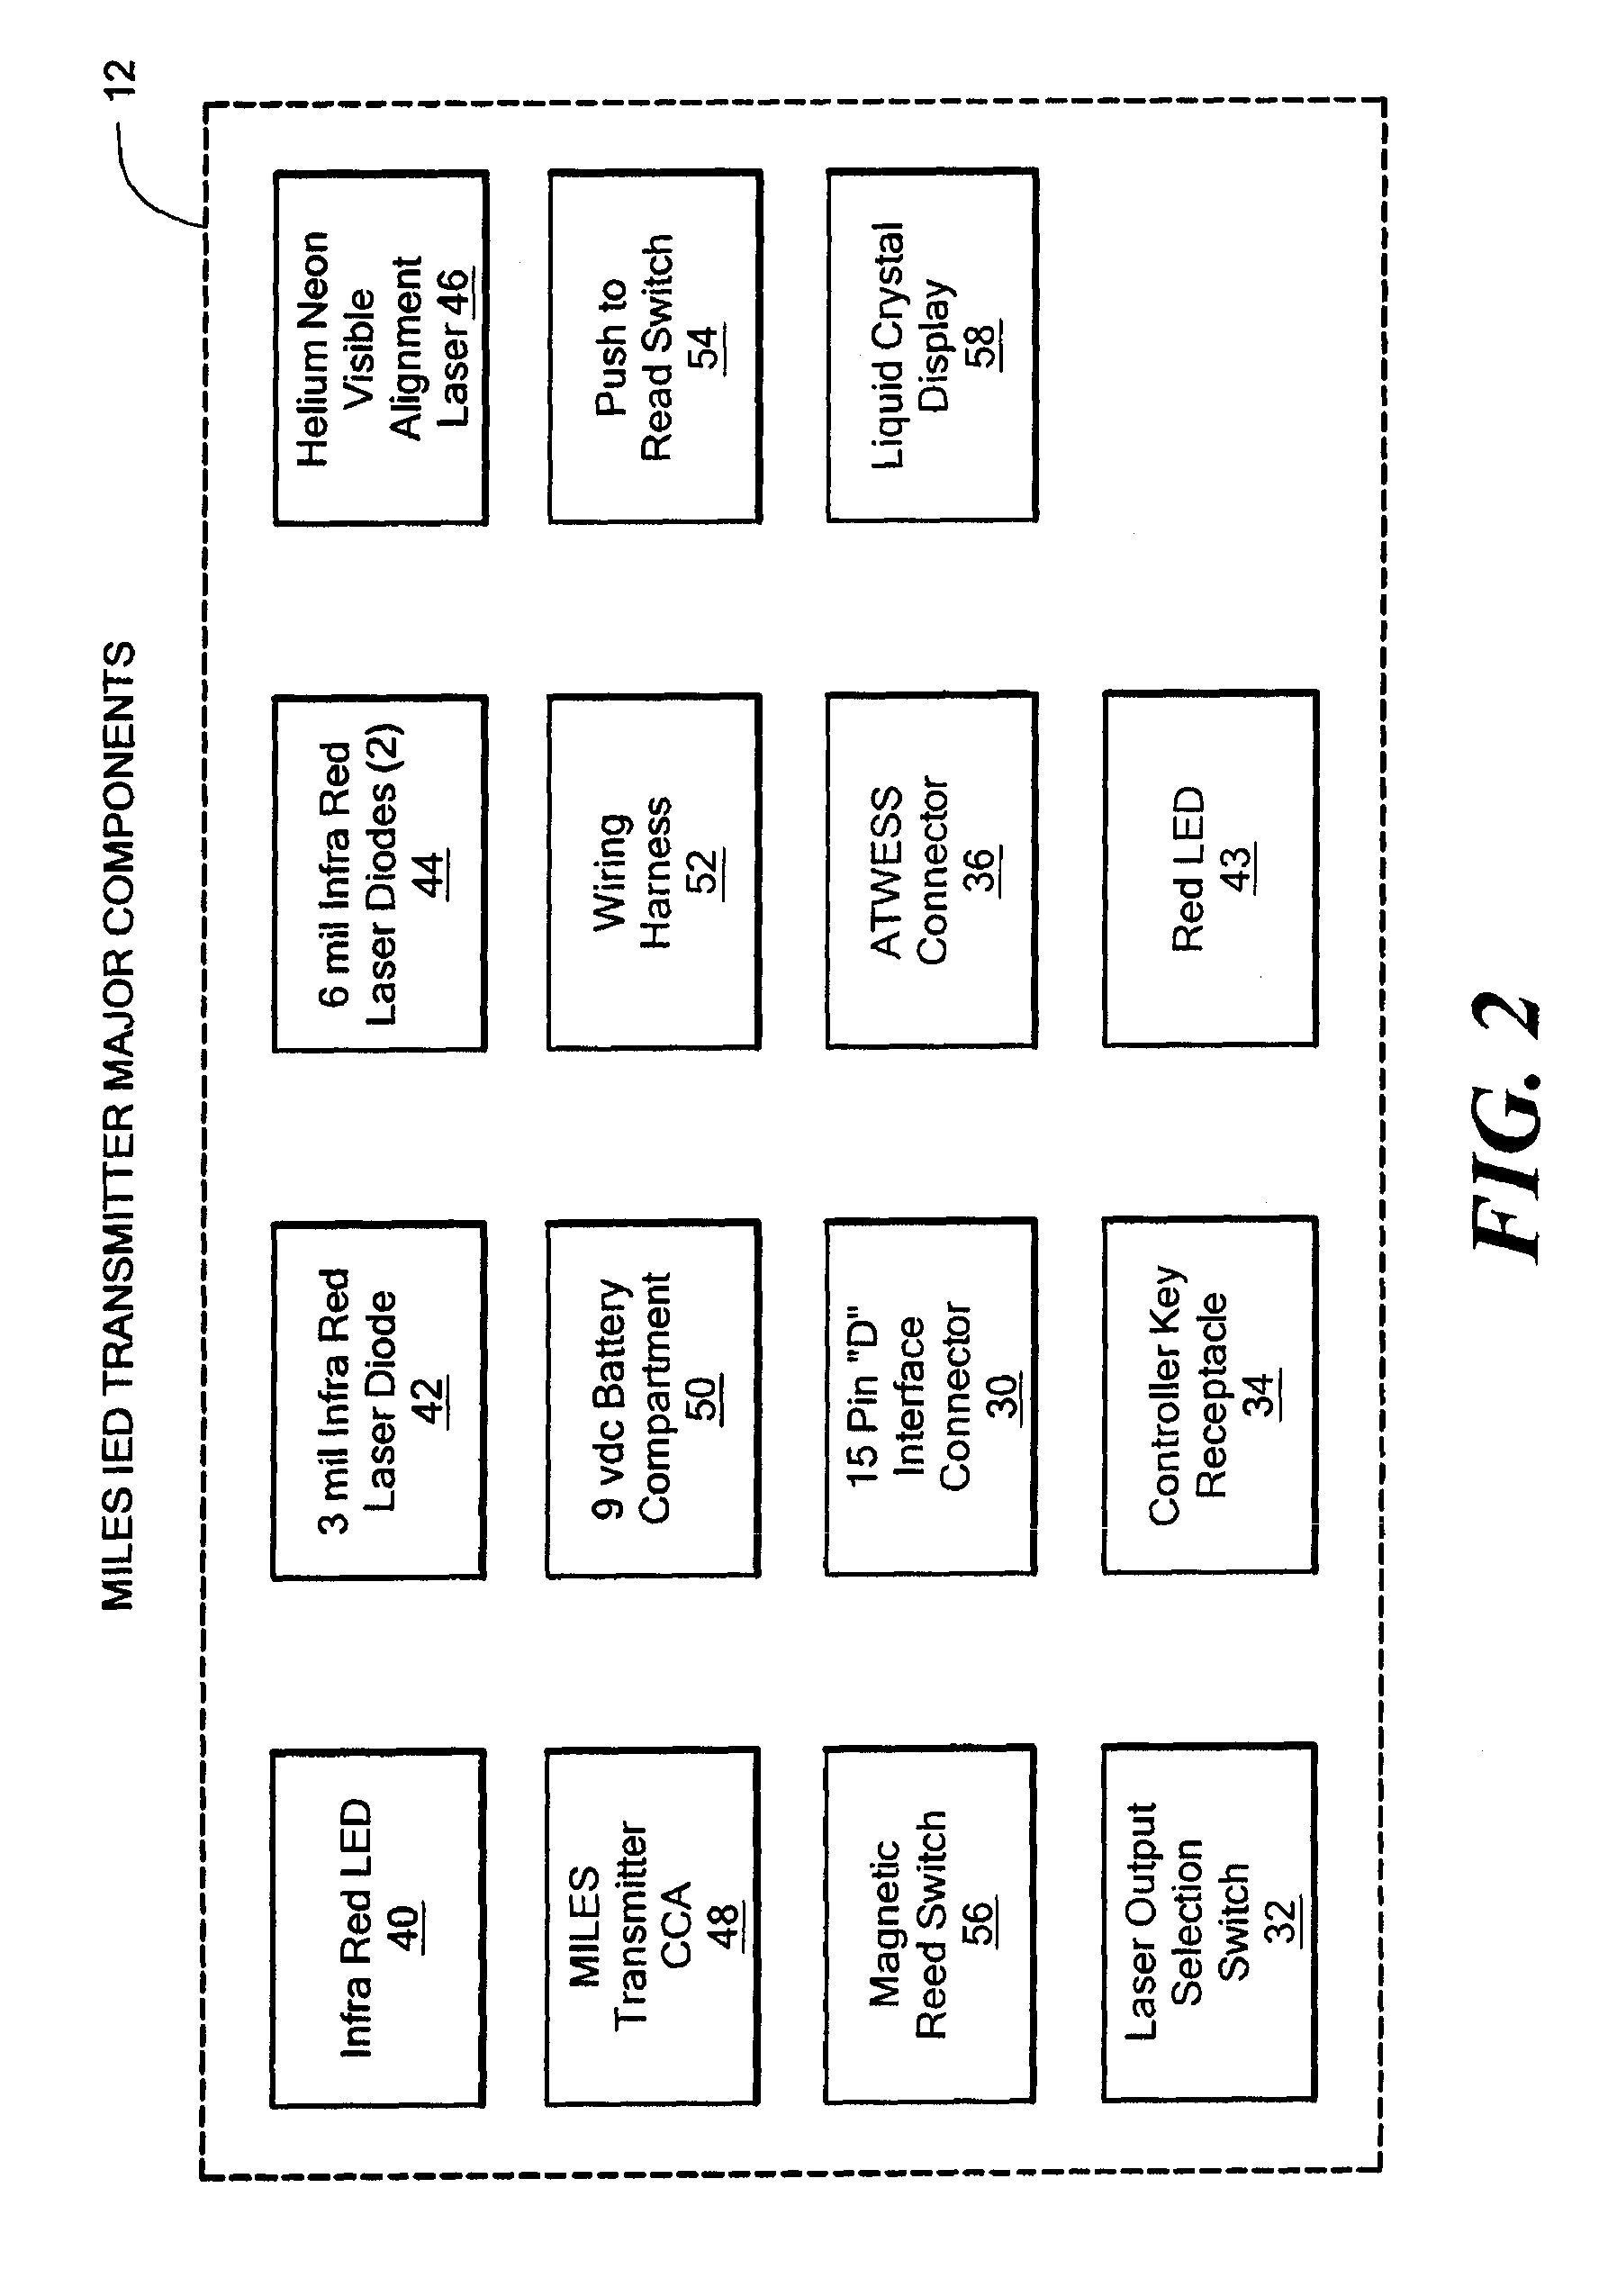 Methods and apparatus to provide training against improvised explosive devices